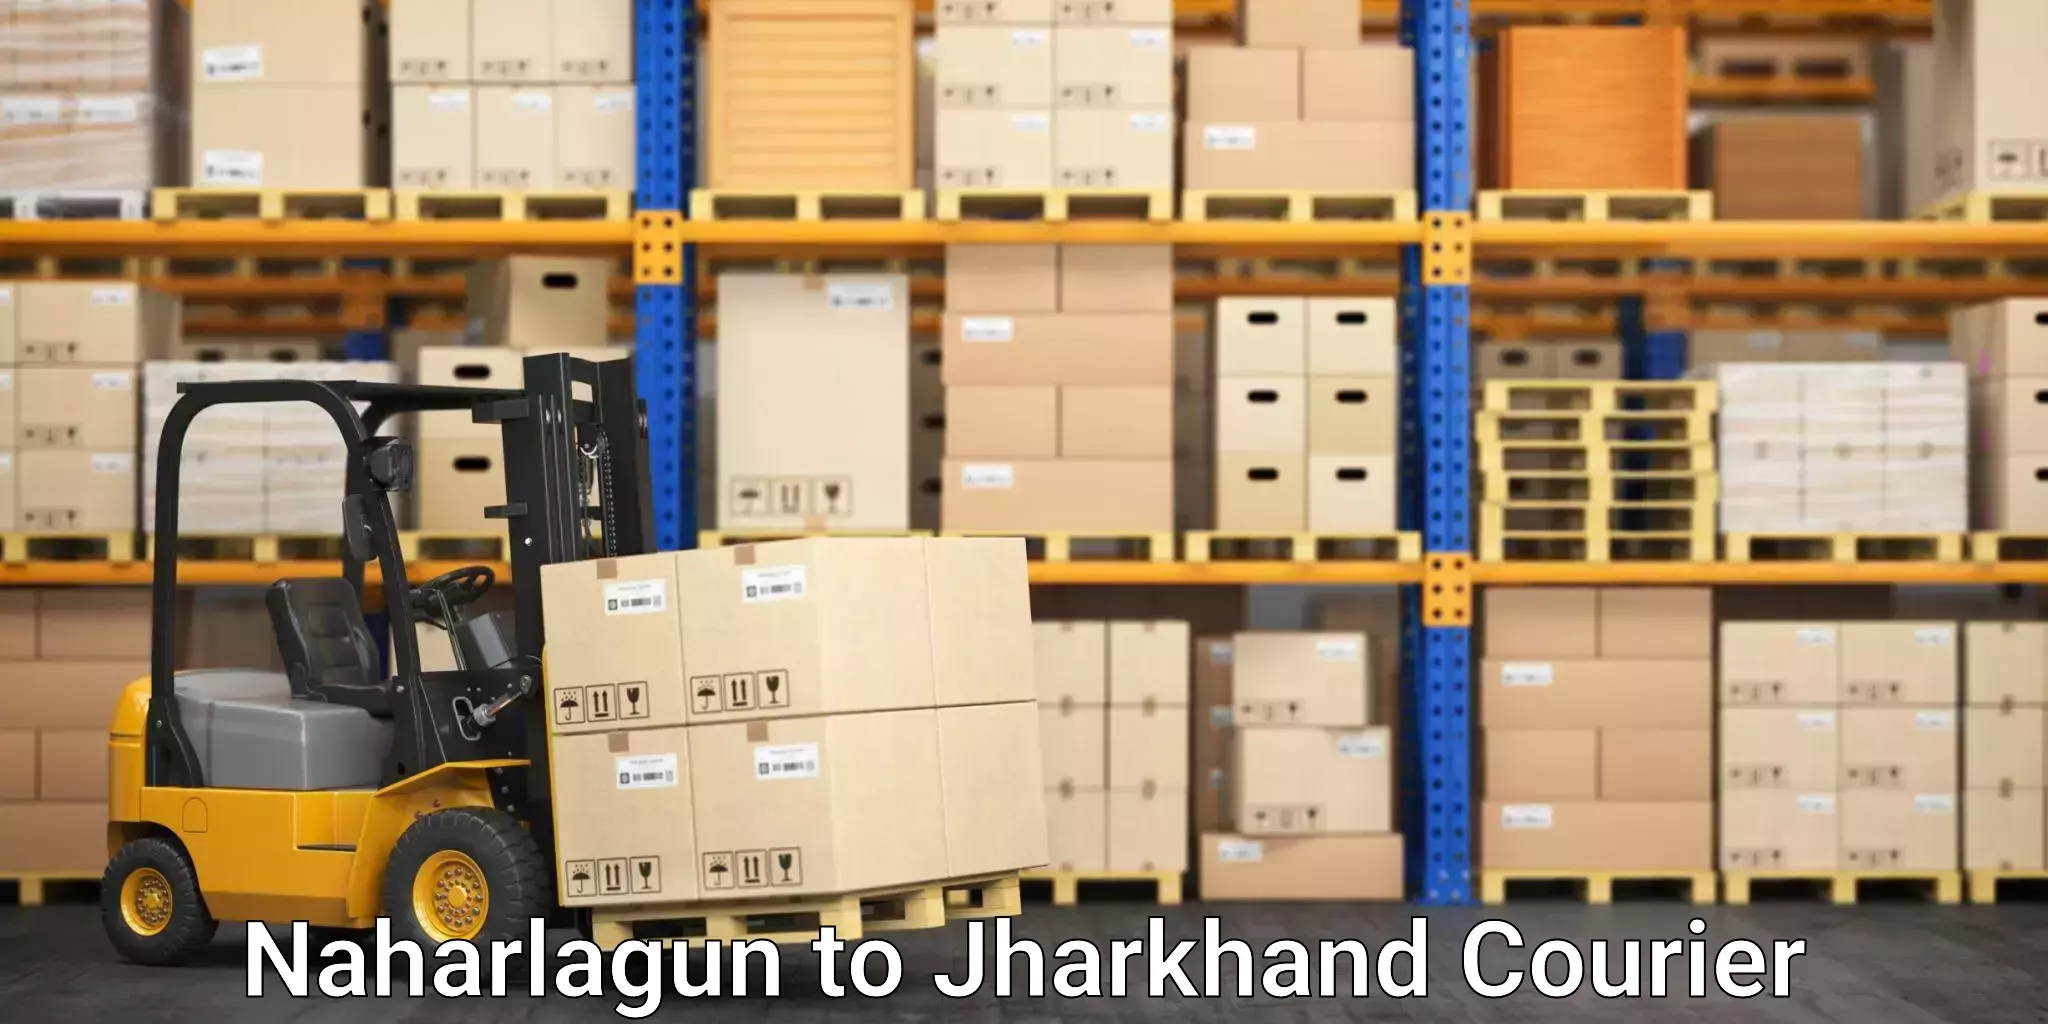 State-of-the-art courier technology Naharlagun to Boarijore